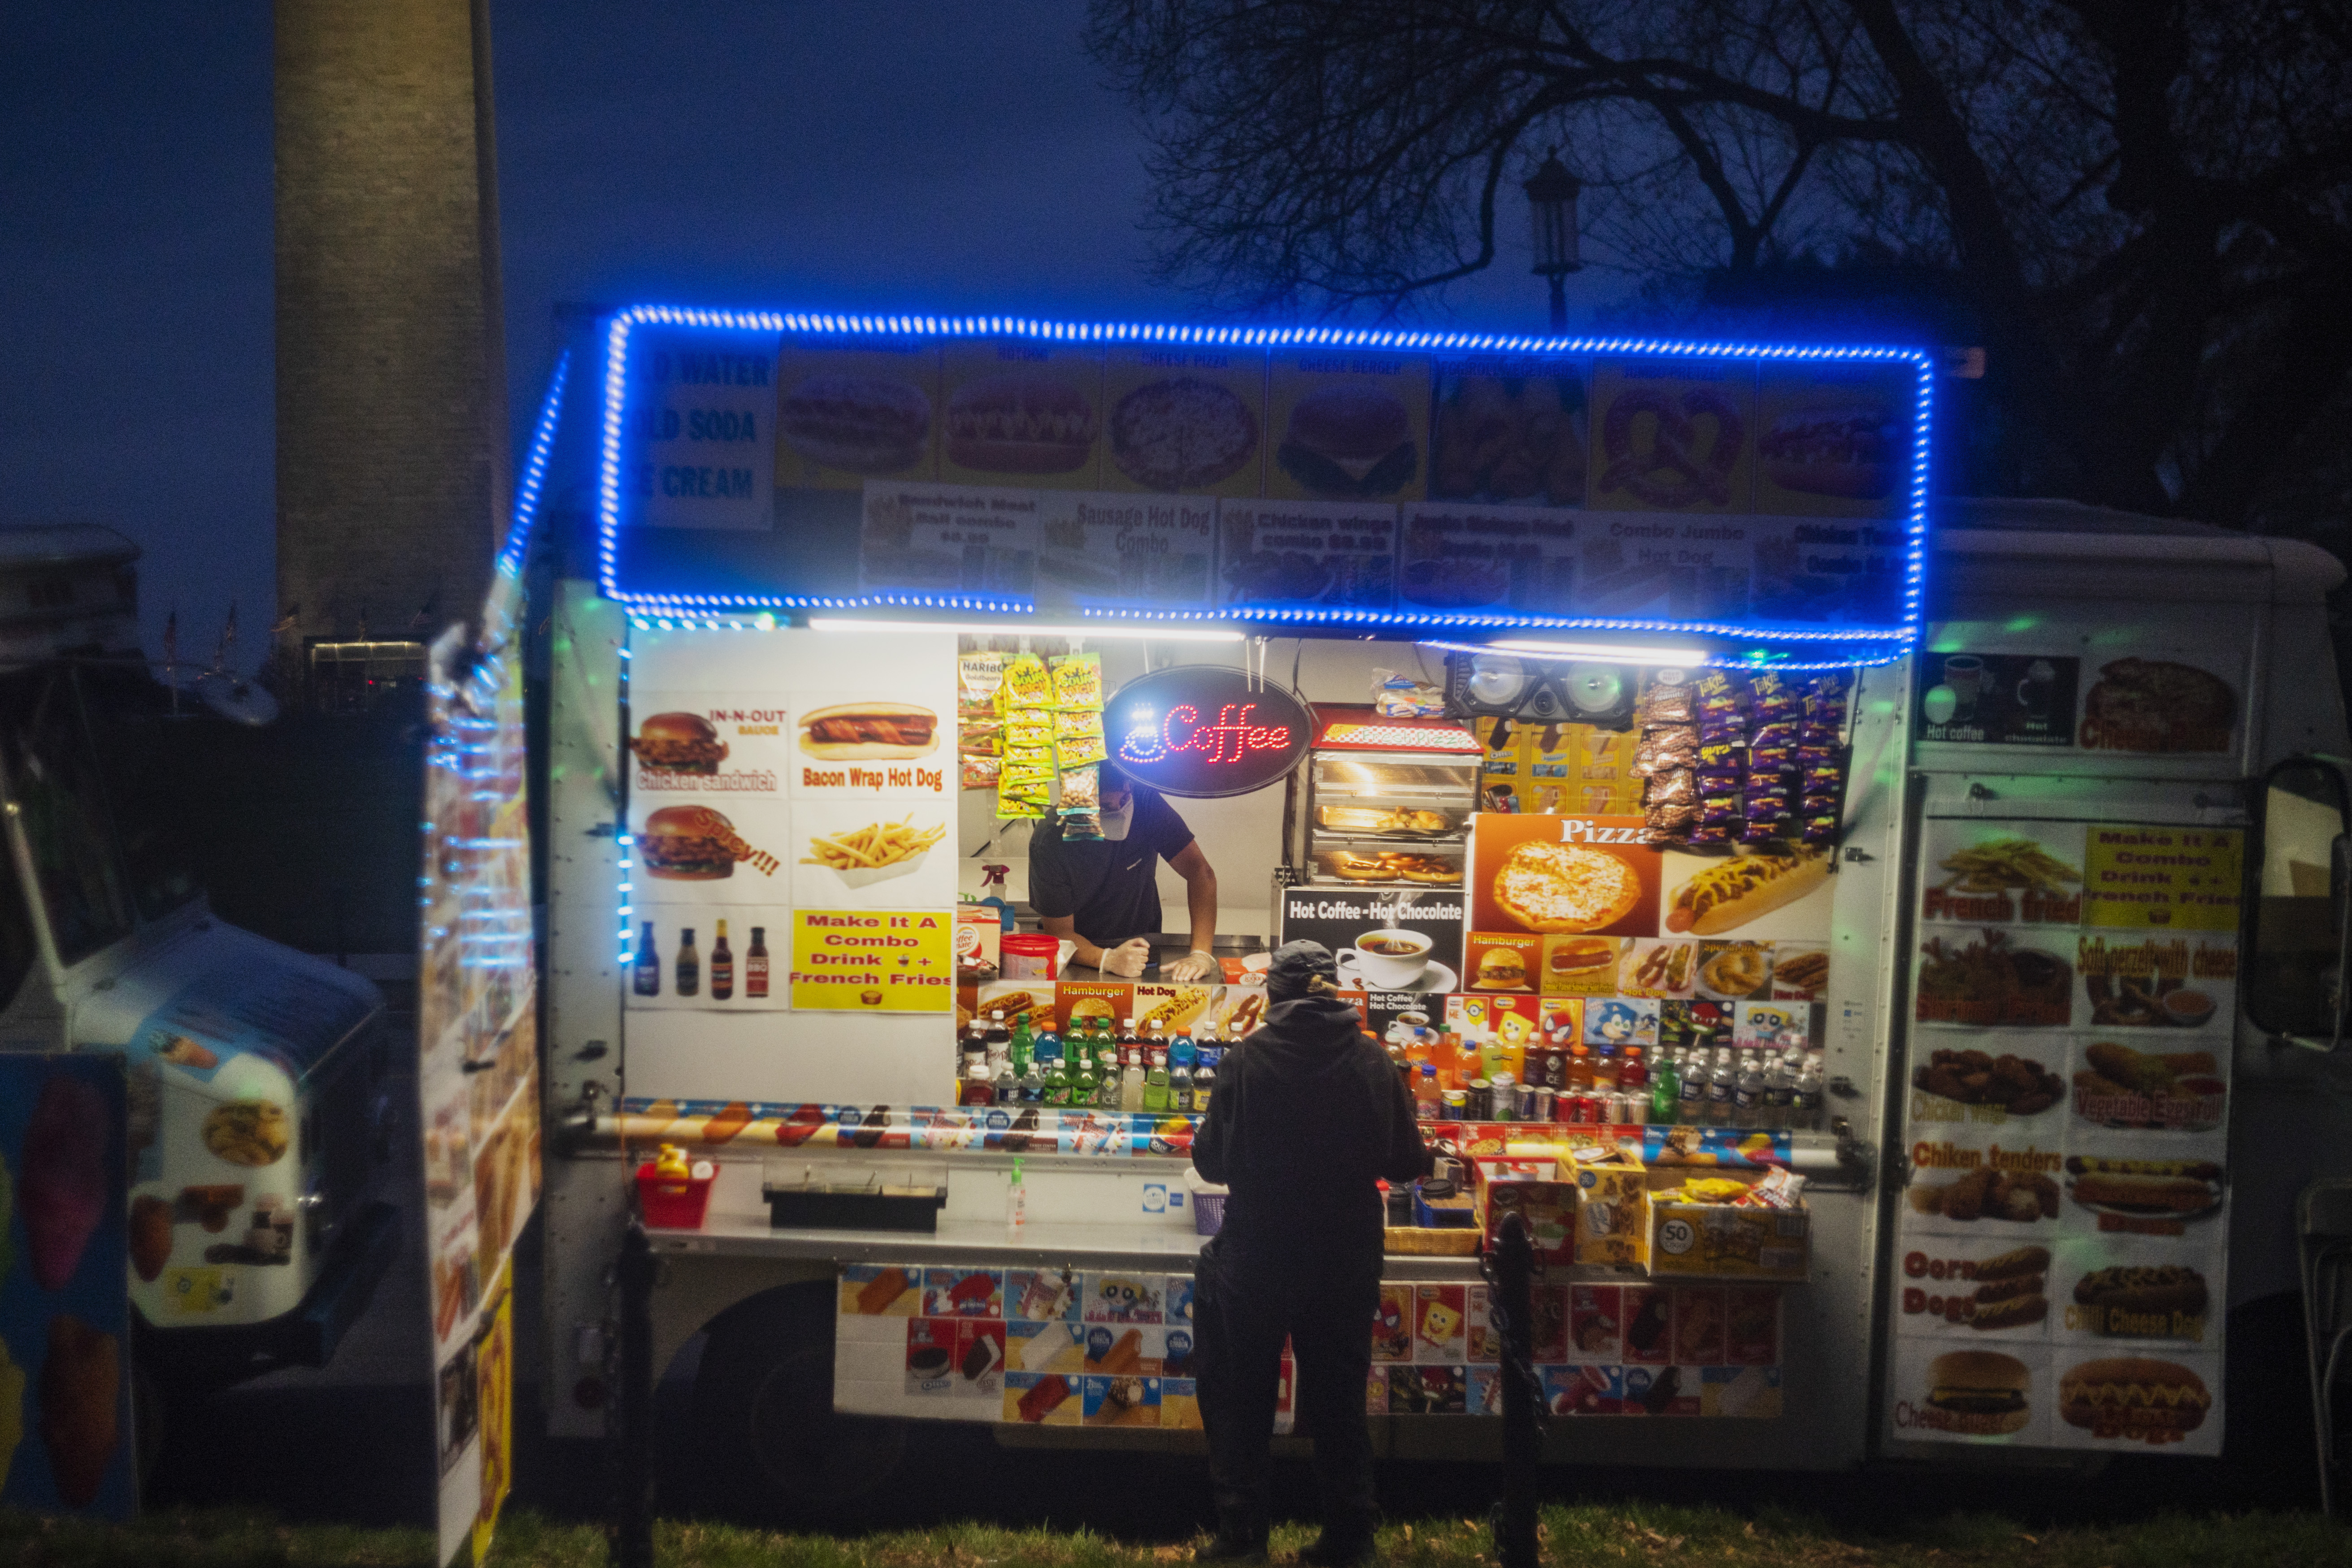 A person works inside a food truck near the Washington Monument at night.